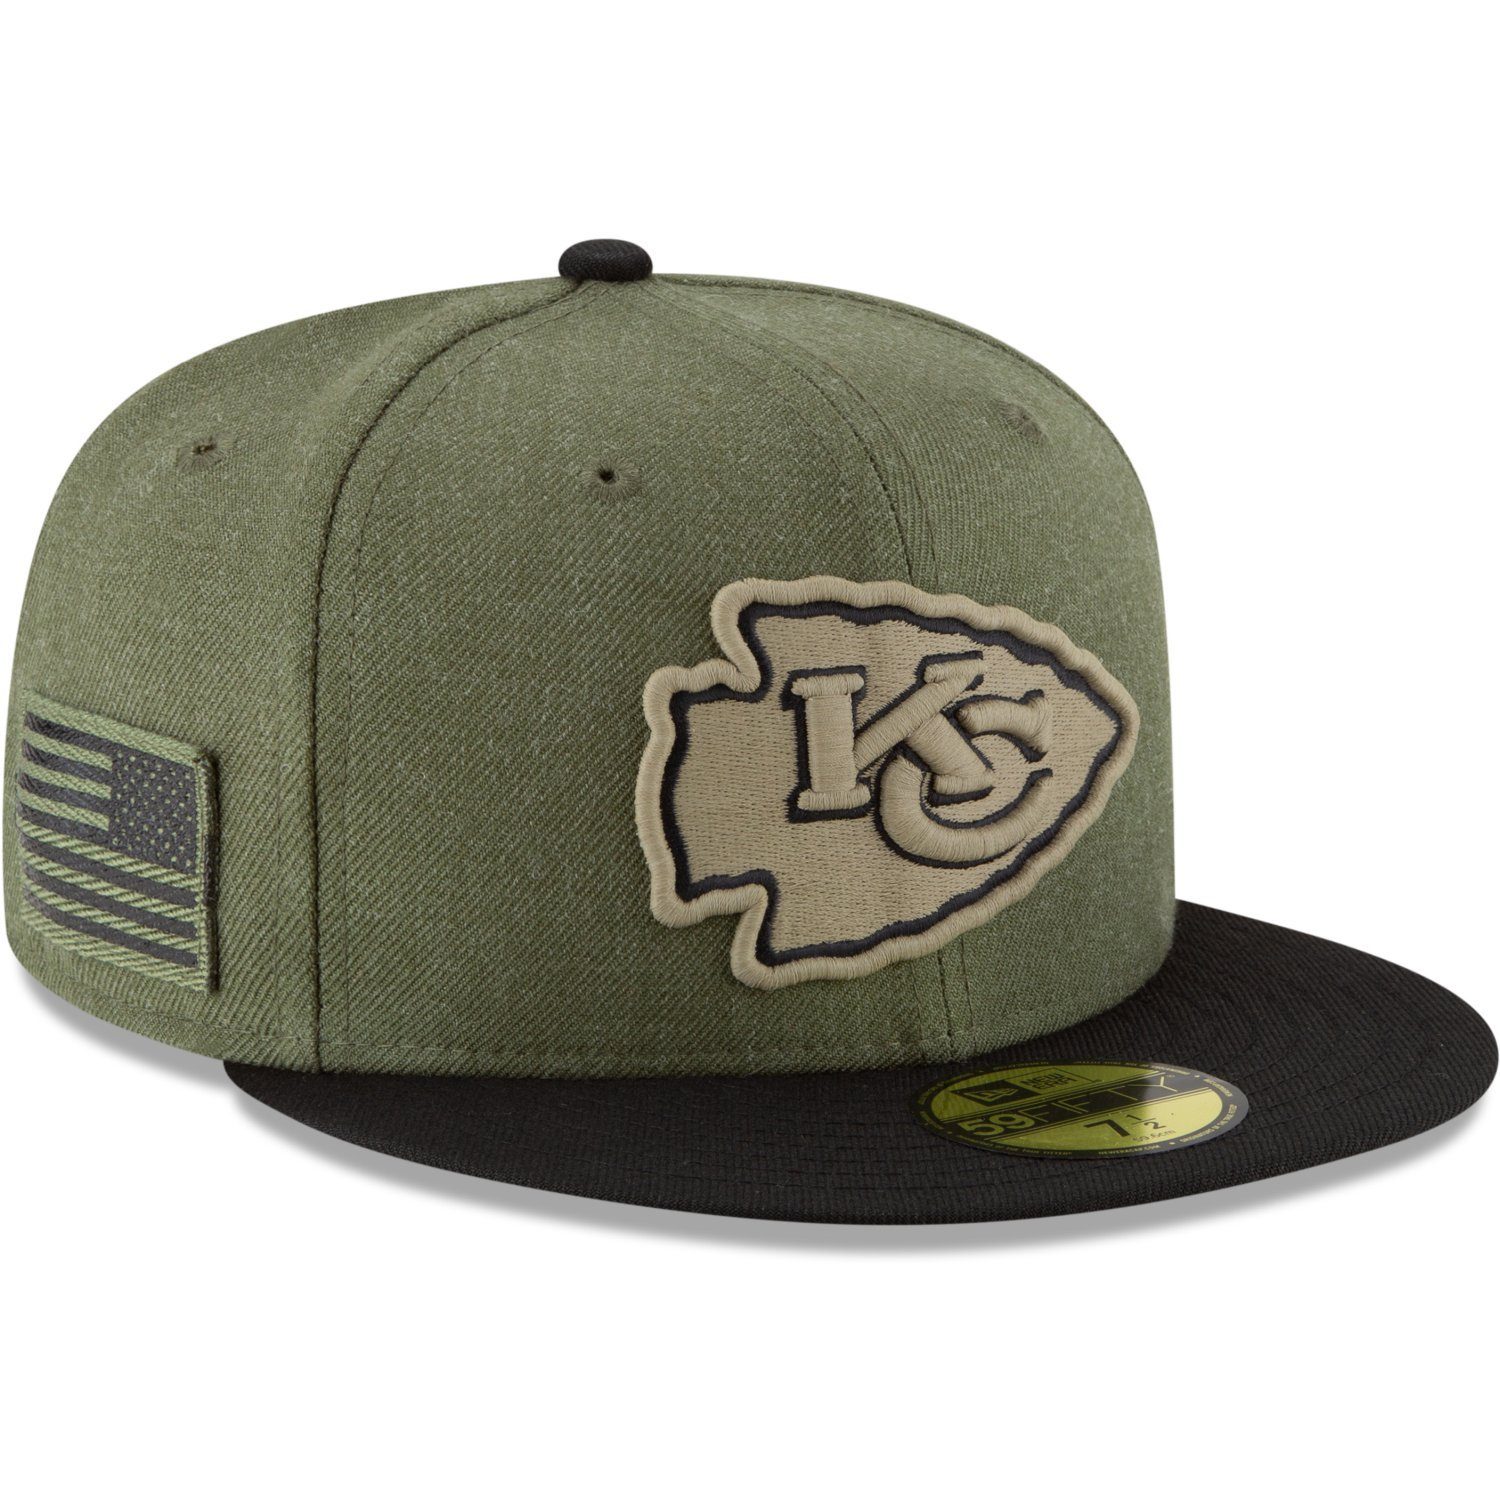 New Era Fitted NFL Service Kansas City Chiefs Salute Cap 59Fifty to